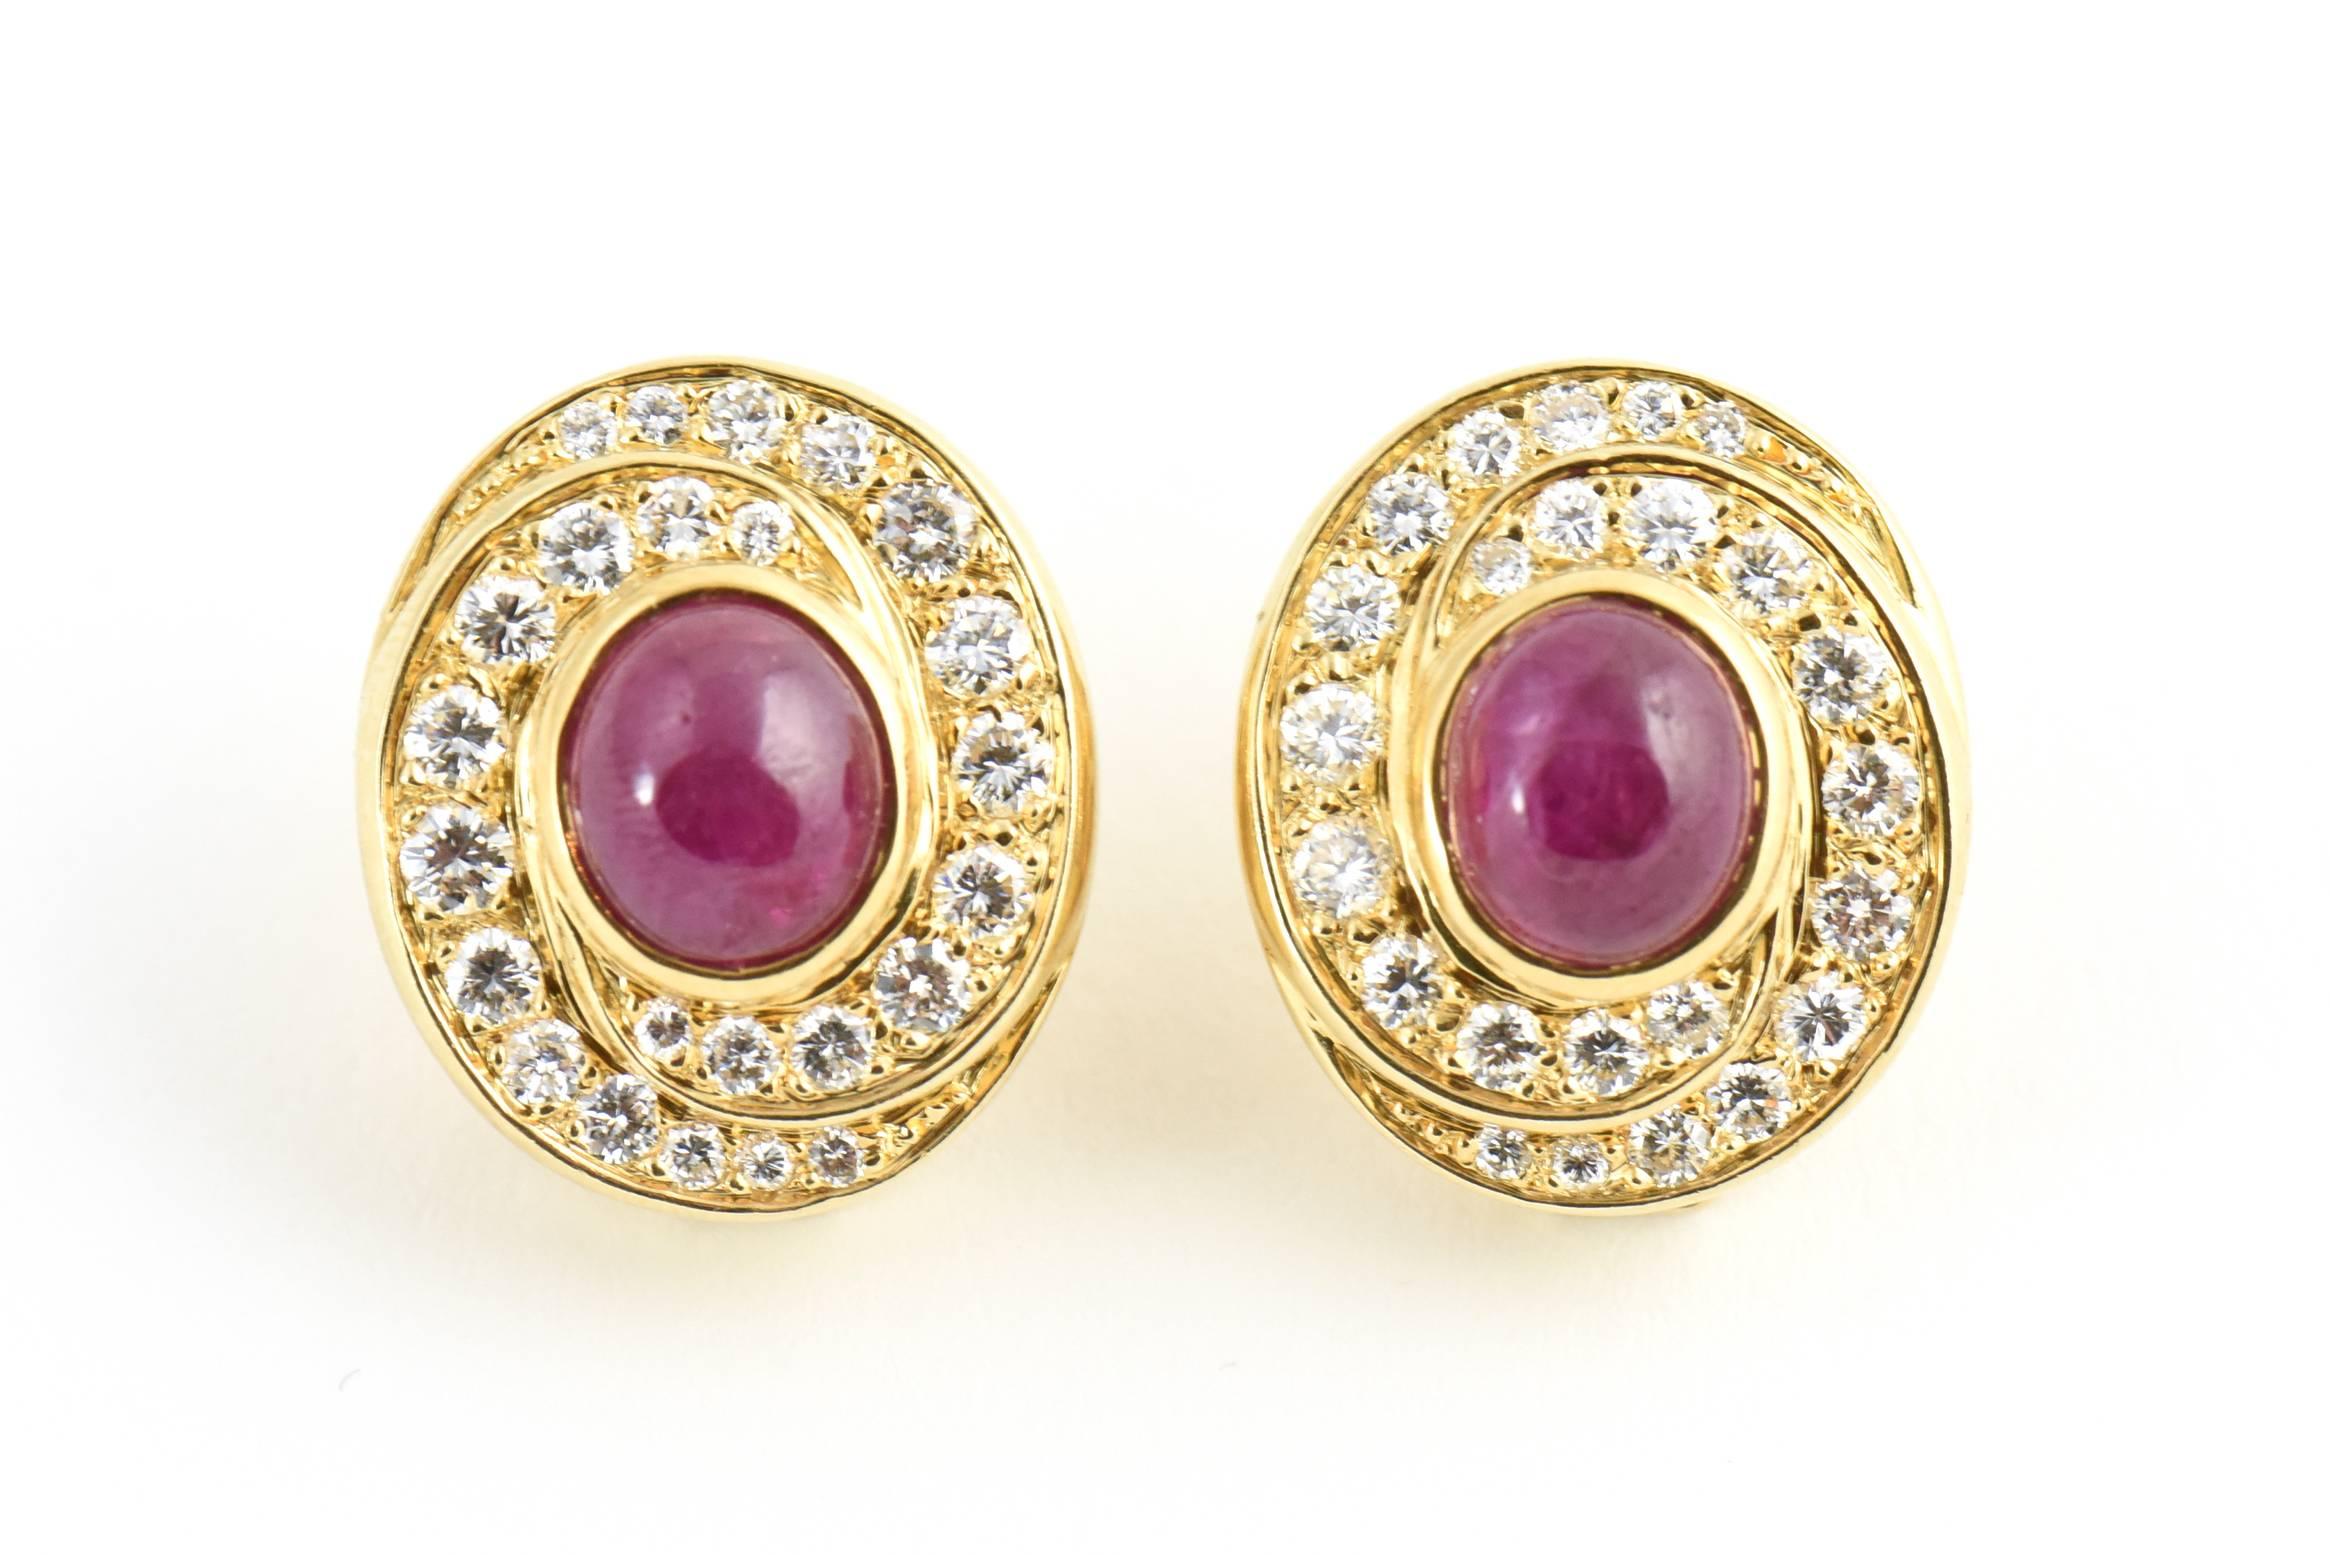 Pave diamonds swirl around a 5c Burma ruby in each of these earrings set in 18k yellow gold.  They have a clip back with NO post.

Marked 18k